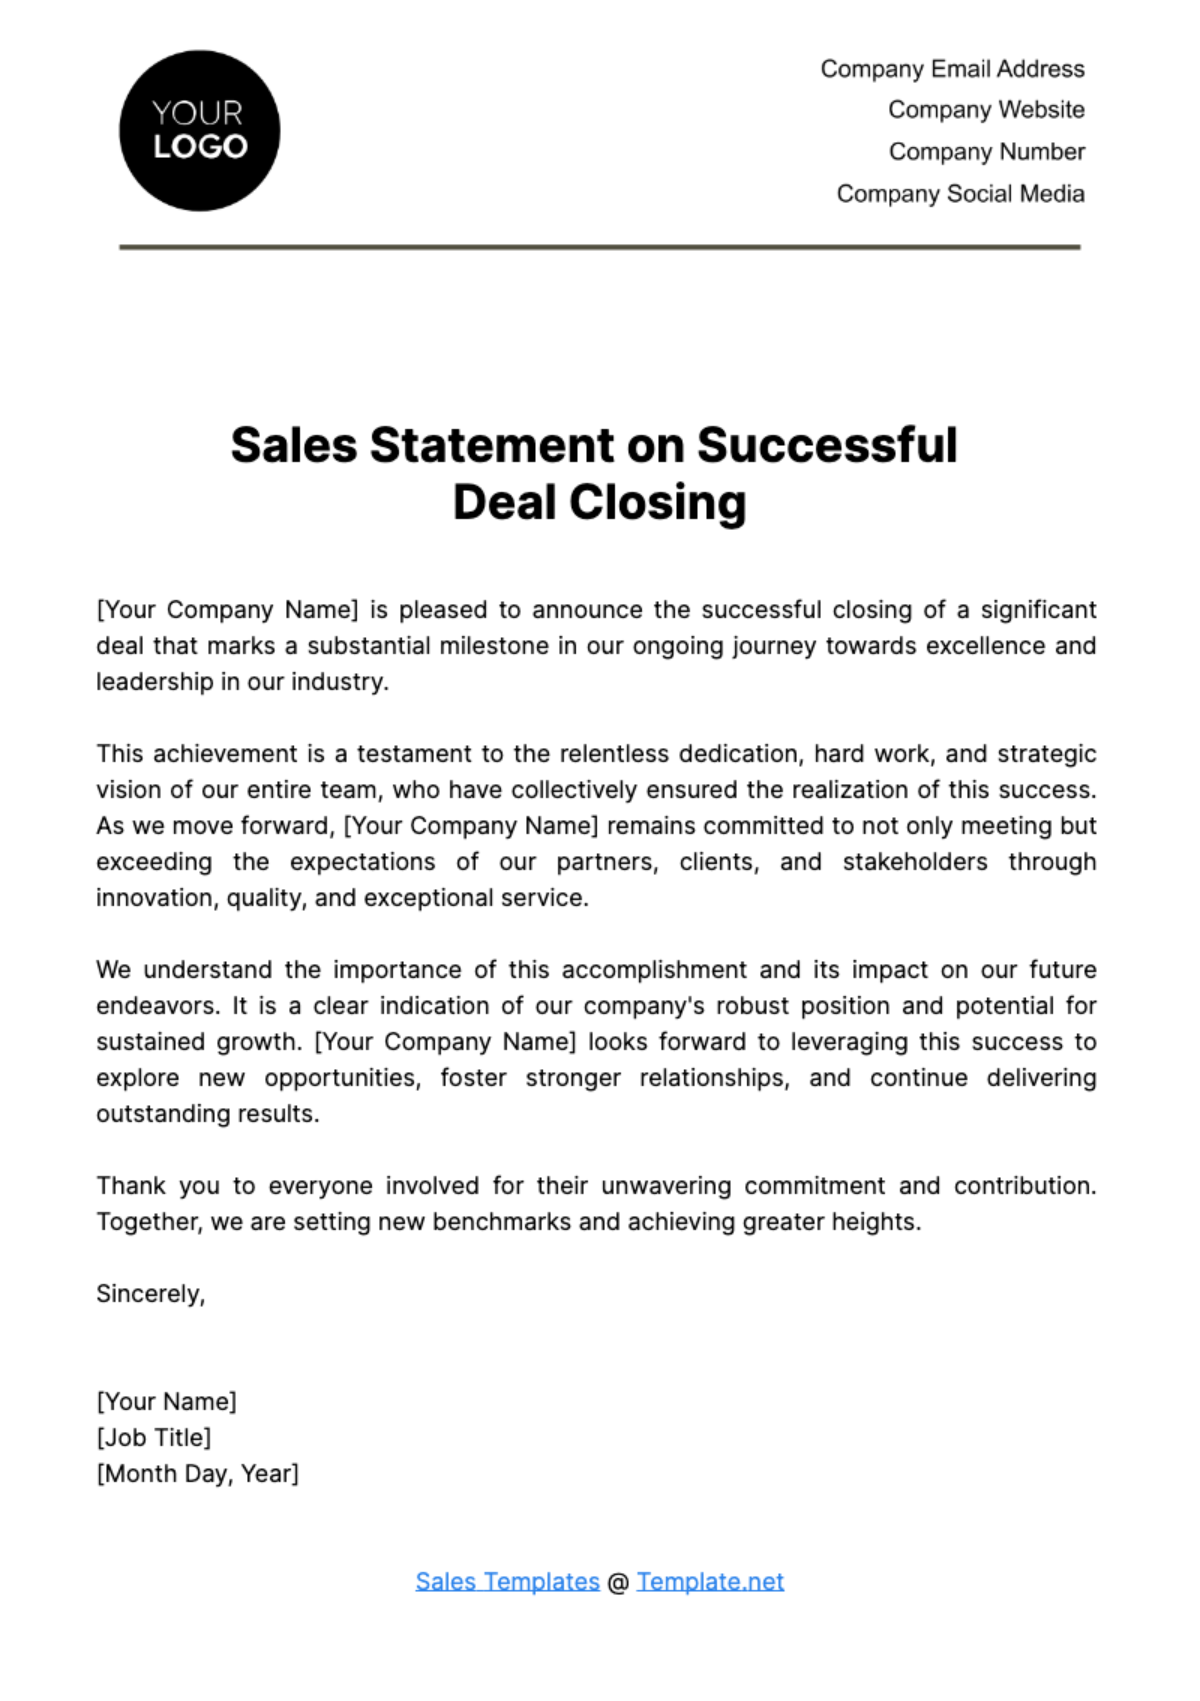 Free Sales Statement on Successful Deal Closing Template